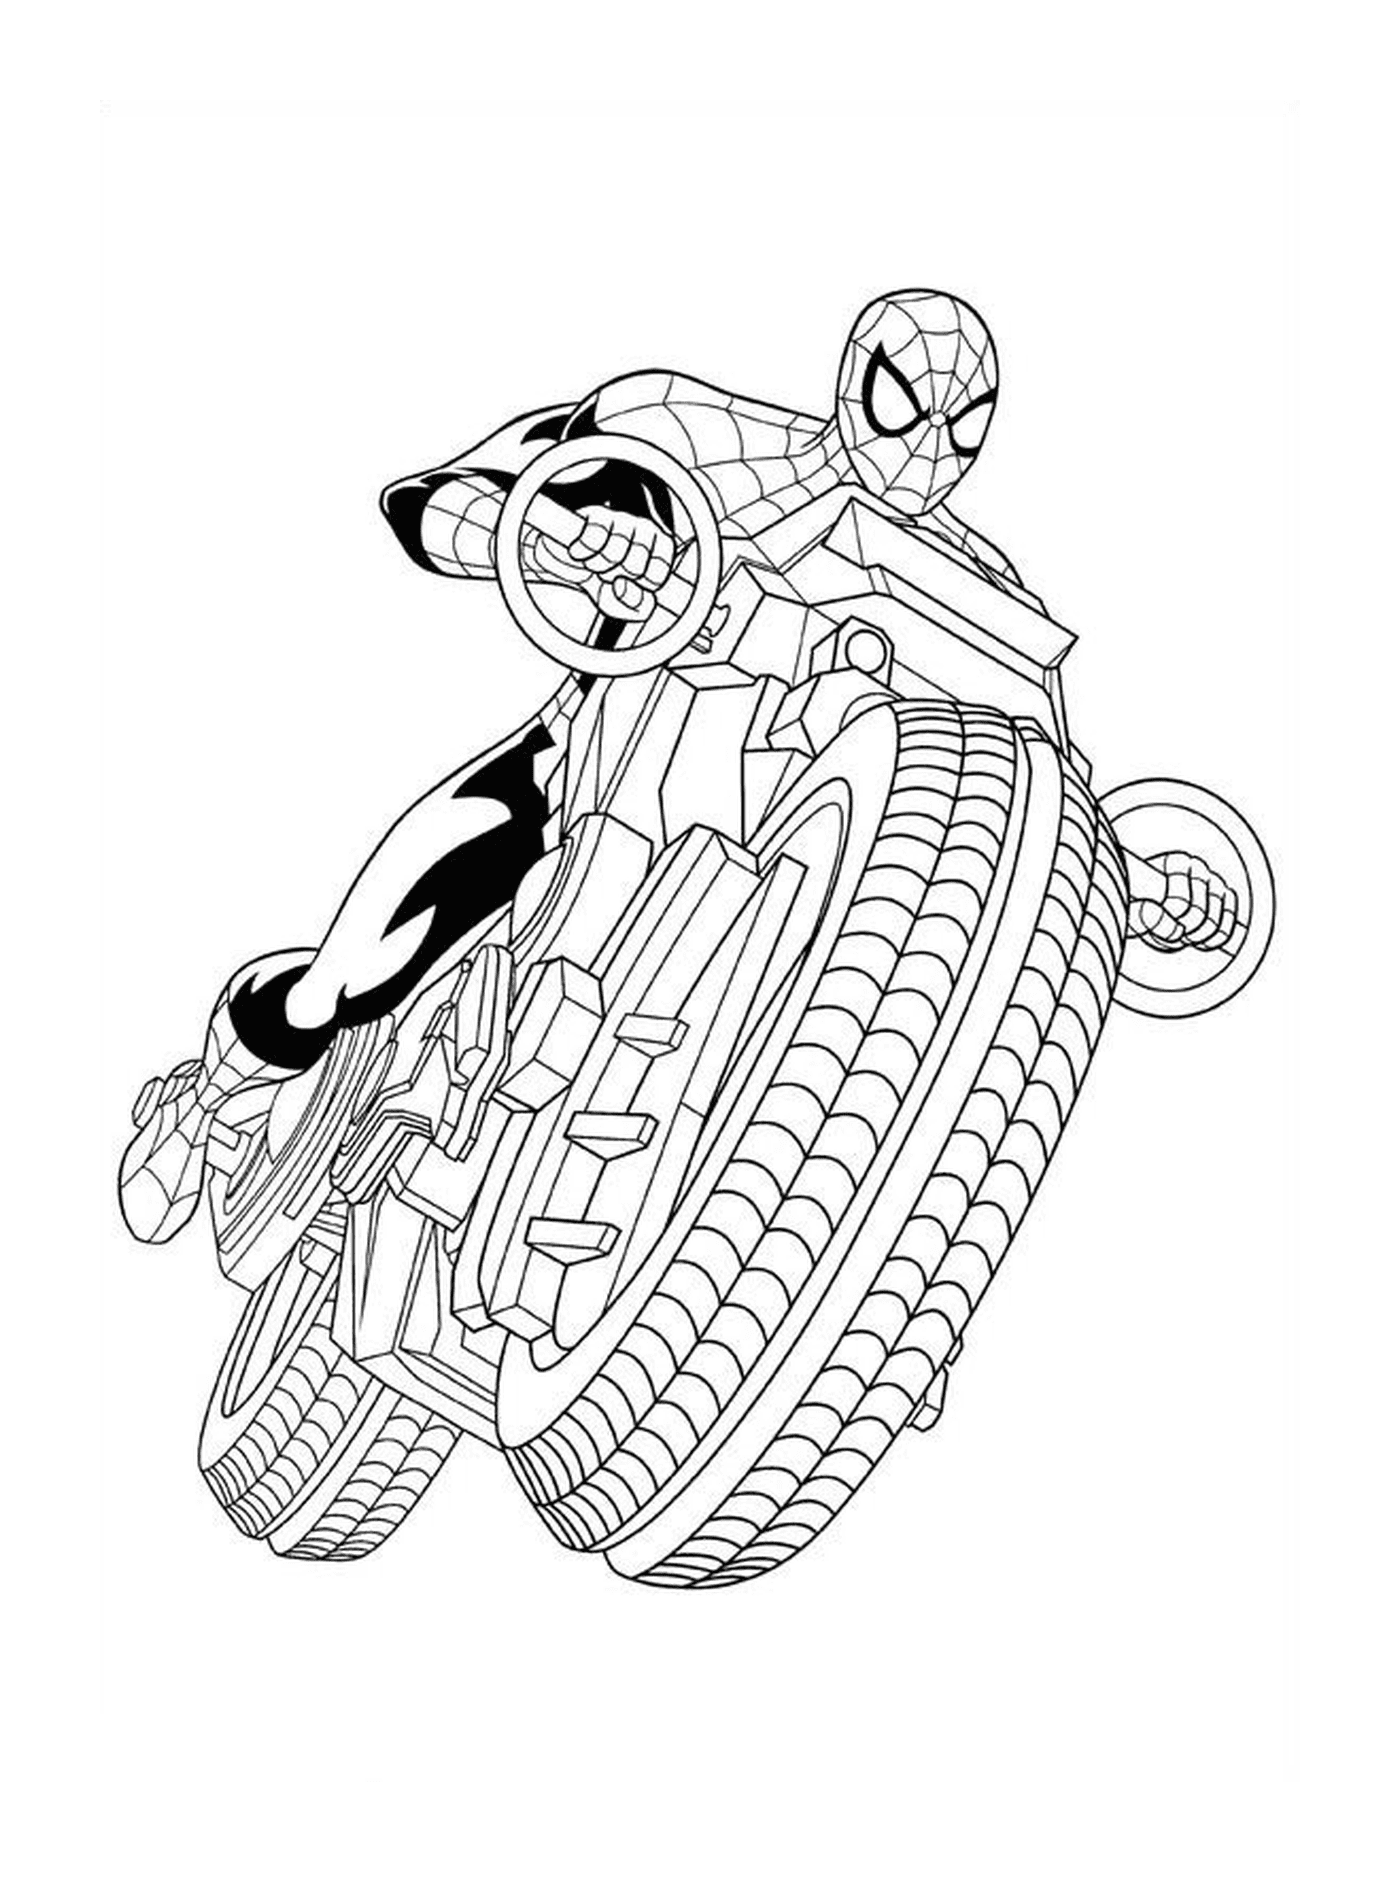  Spiderman on a motorcycle 